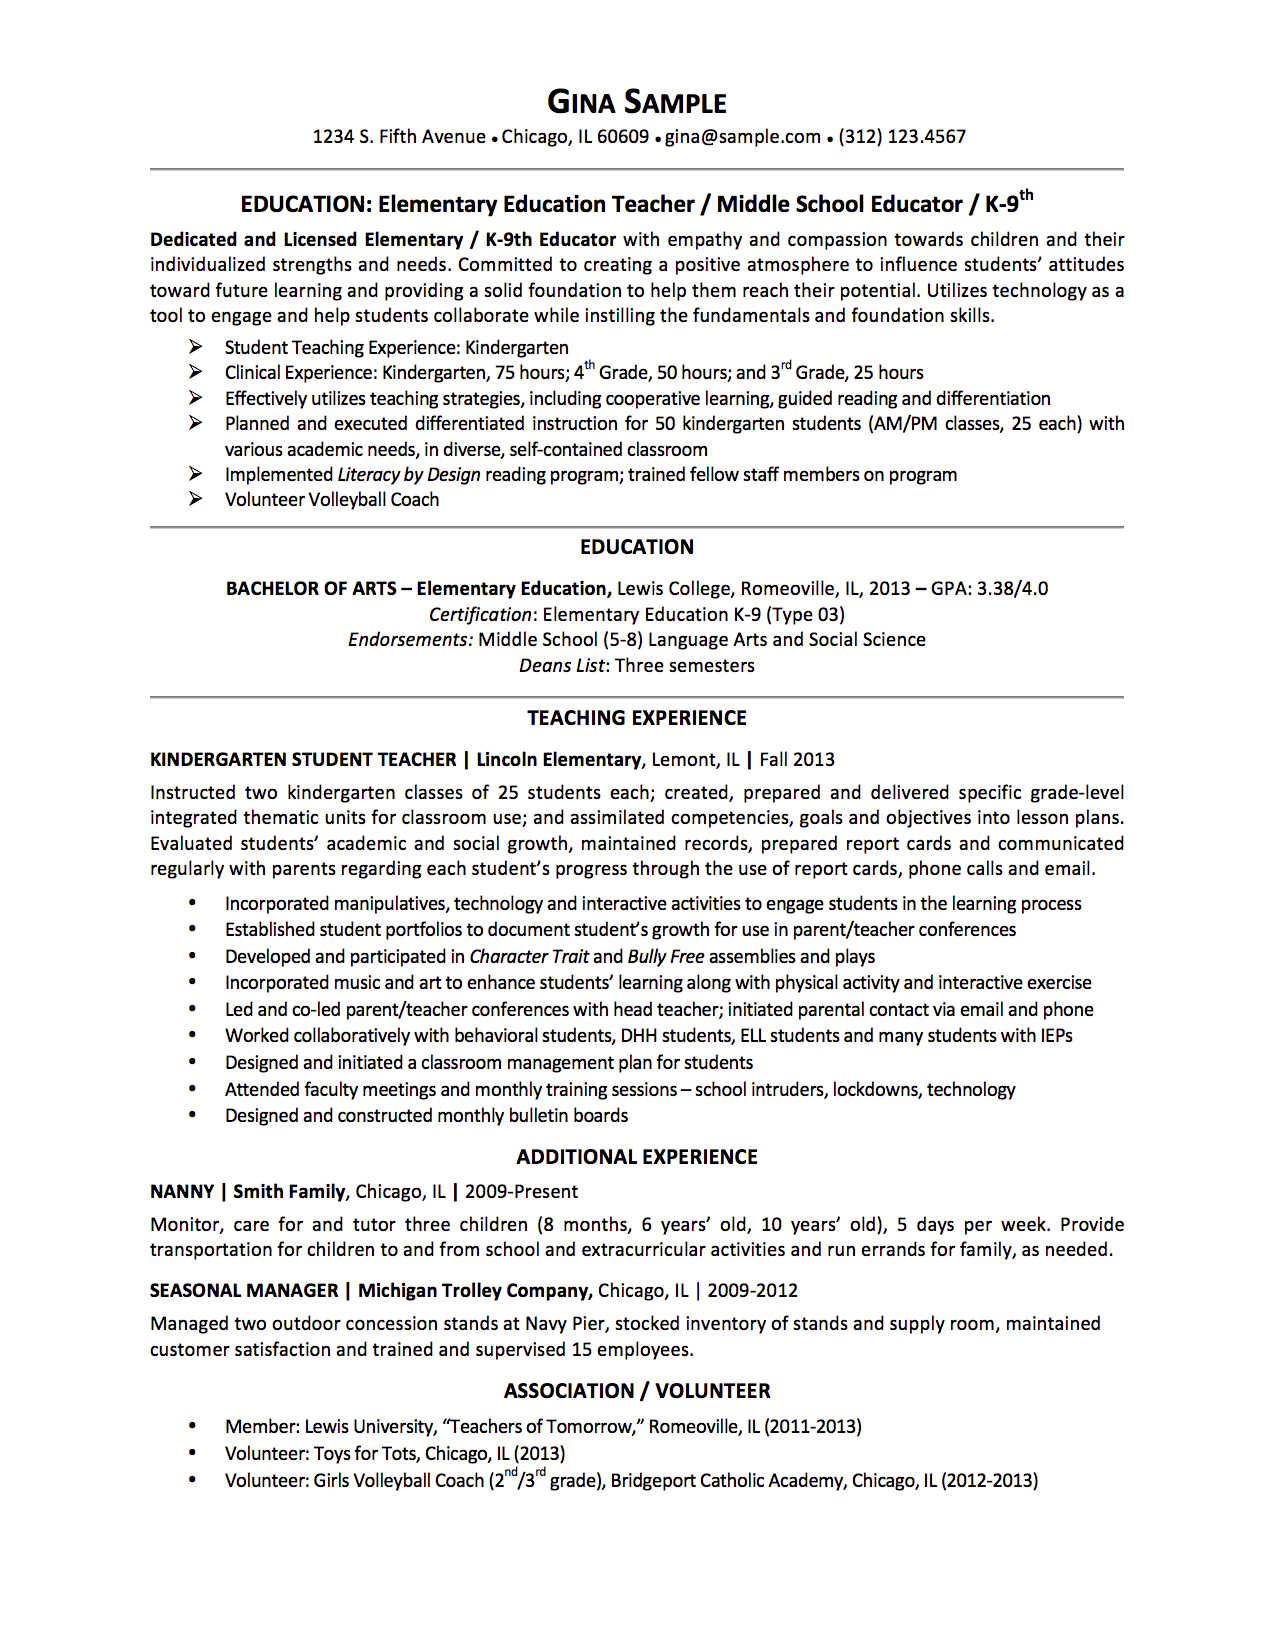 professional resume help chicago il